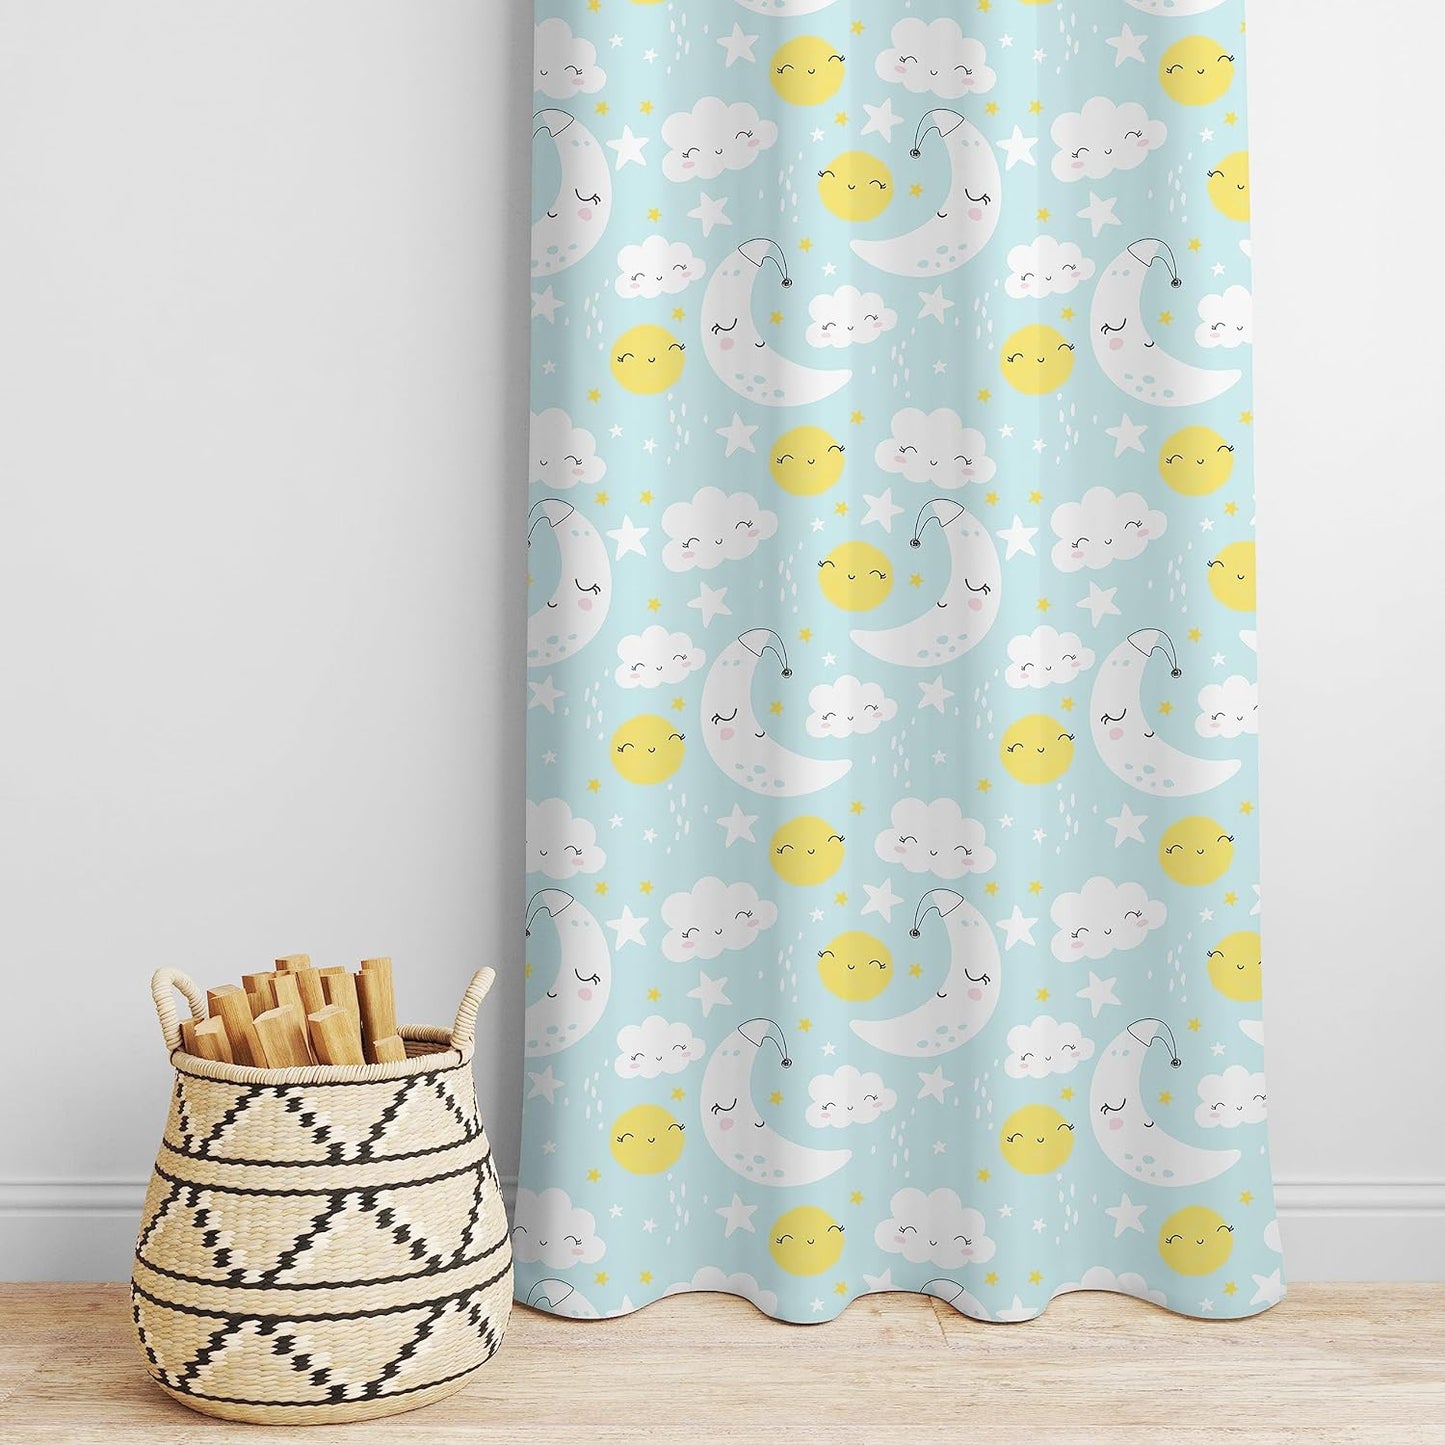 Cartoon sun, moon, and clouds on blue and yellow curtain.